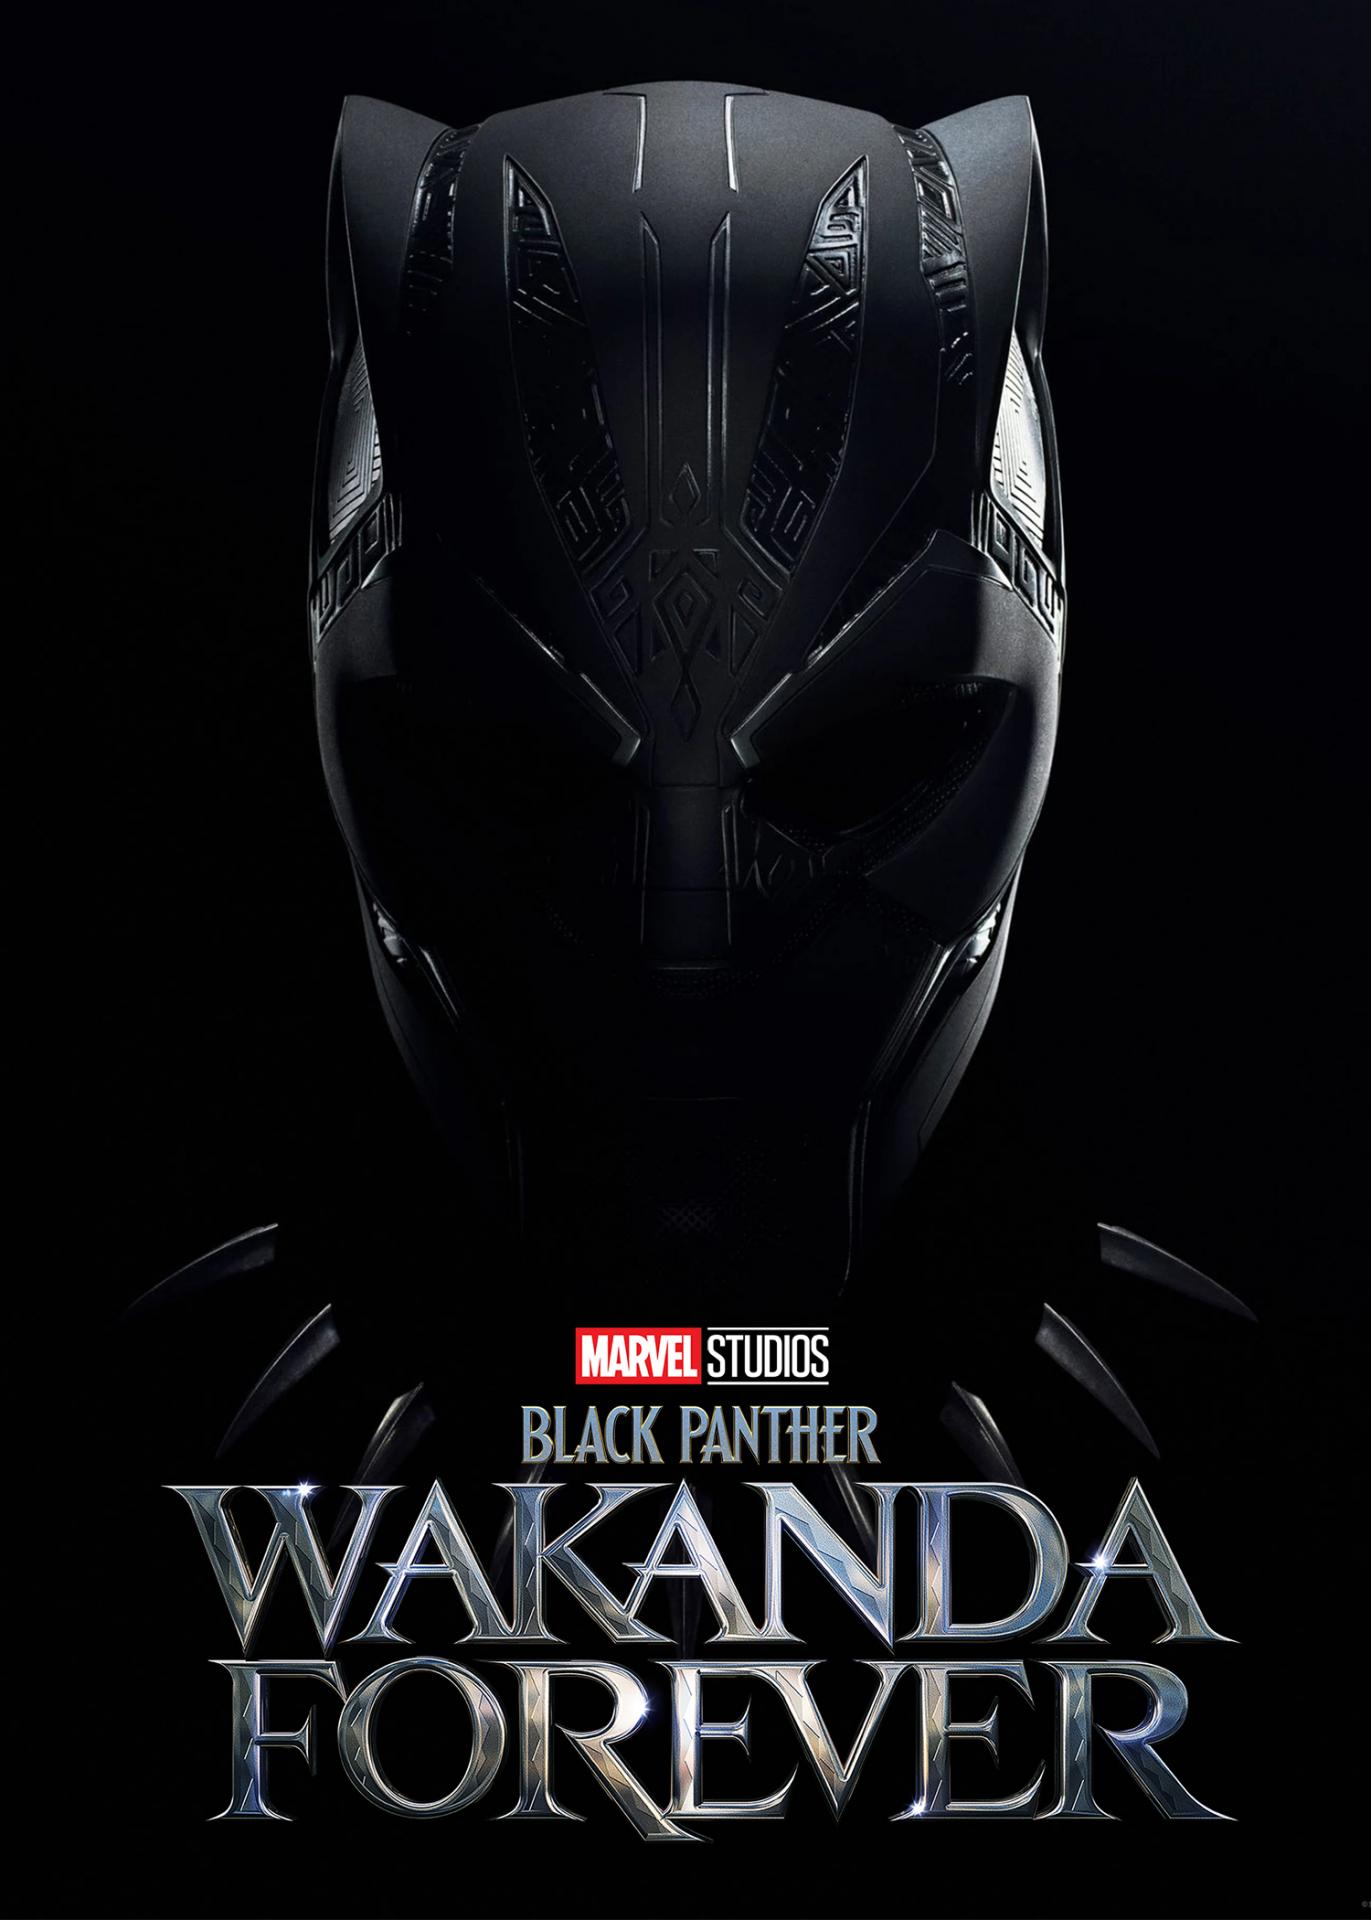 Blackpanther2022 textless